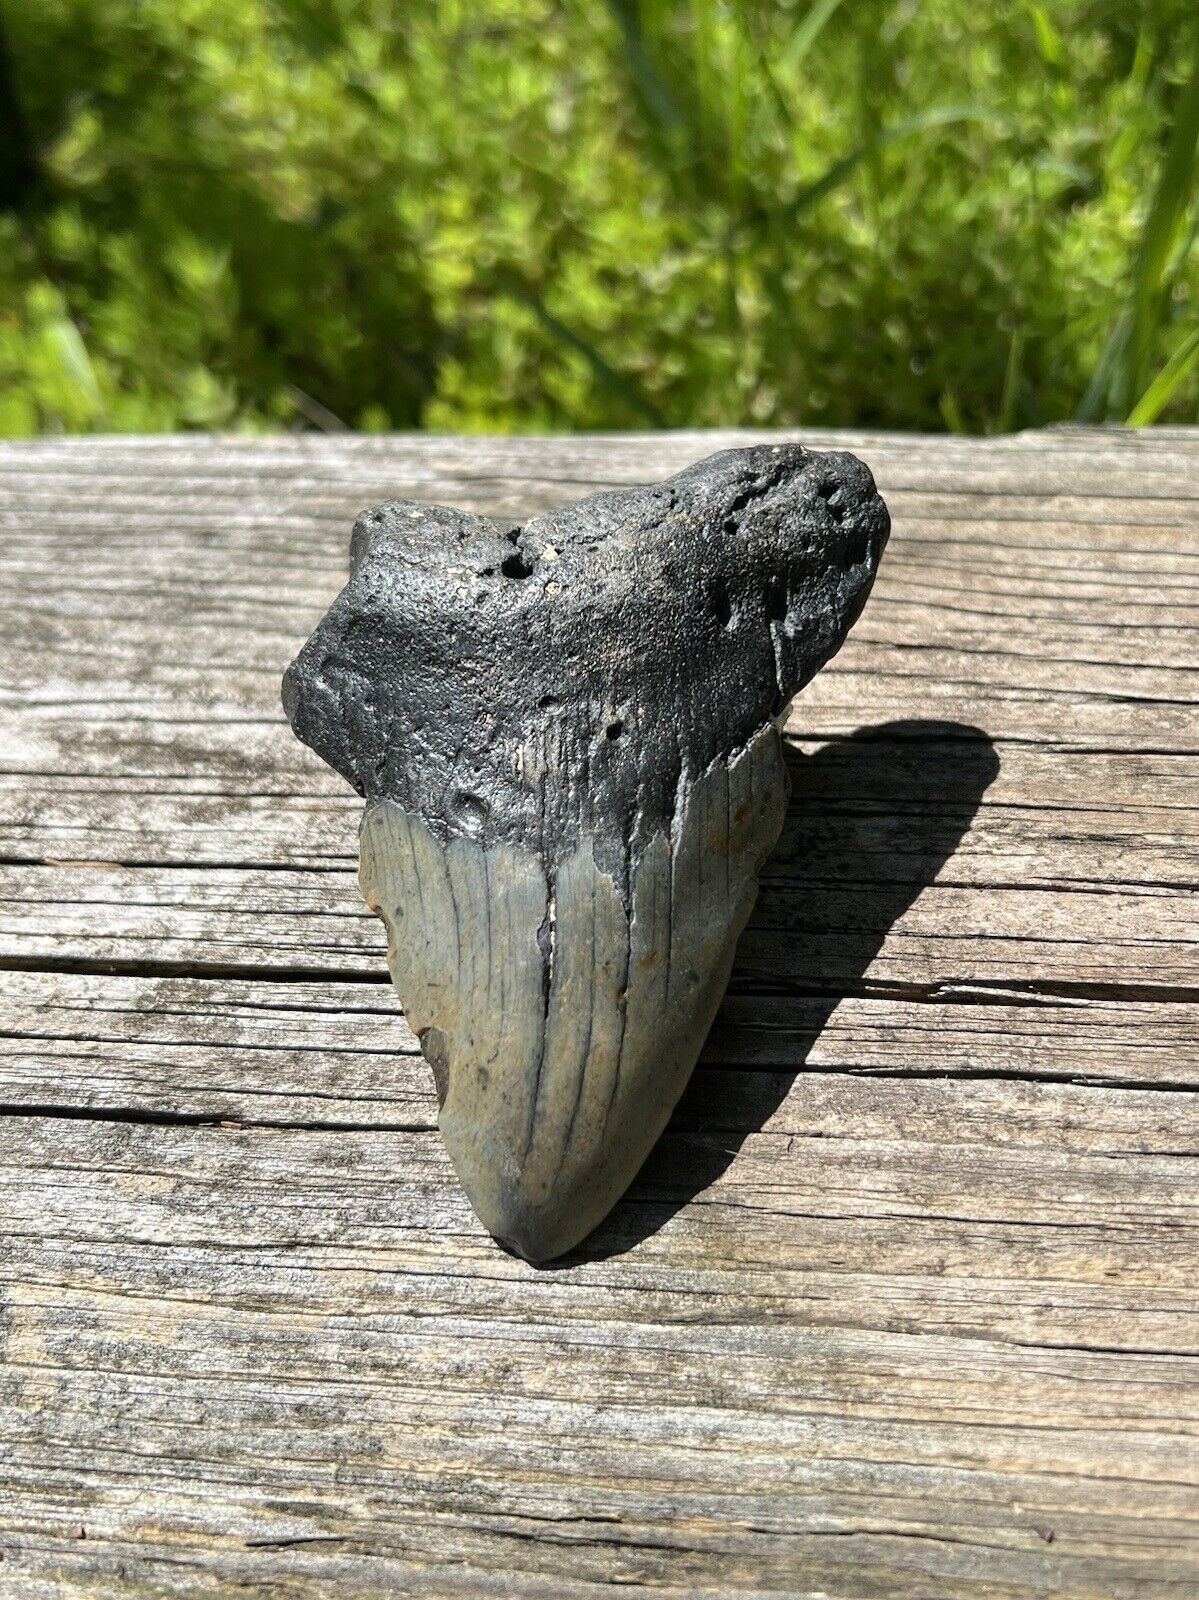 Large Megalodon Shark Tooth- Natural 3.3” Miocene Age Fossilized Shark Tooth